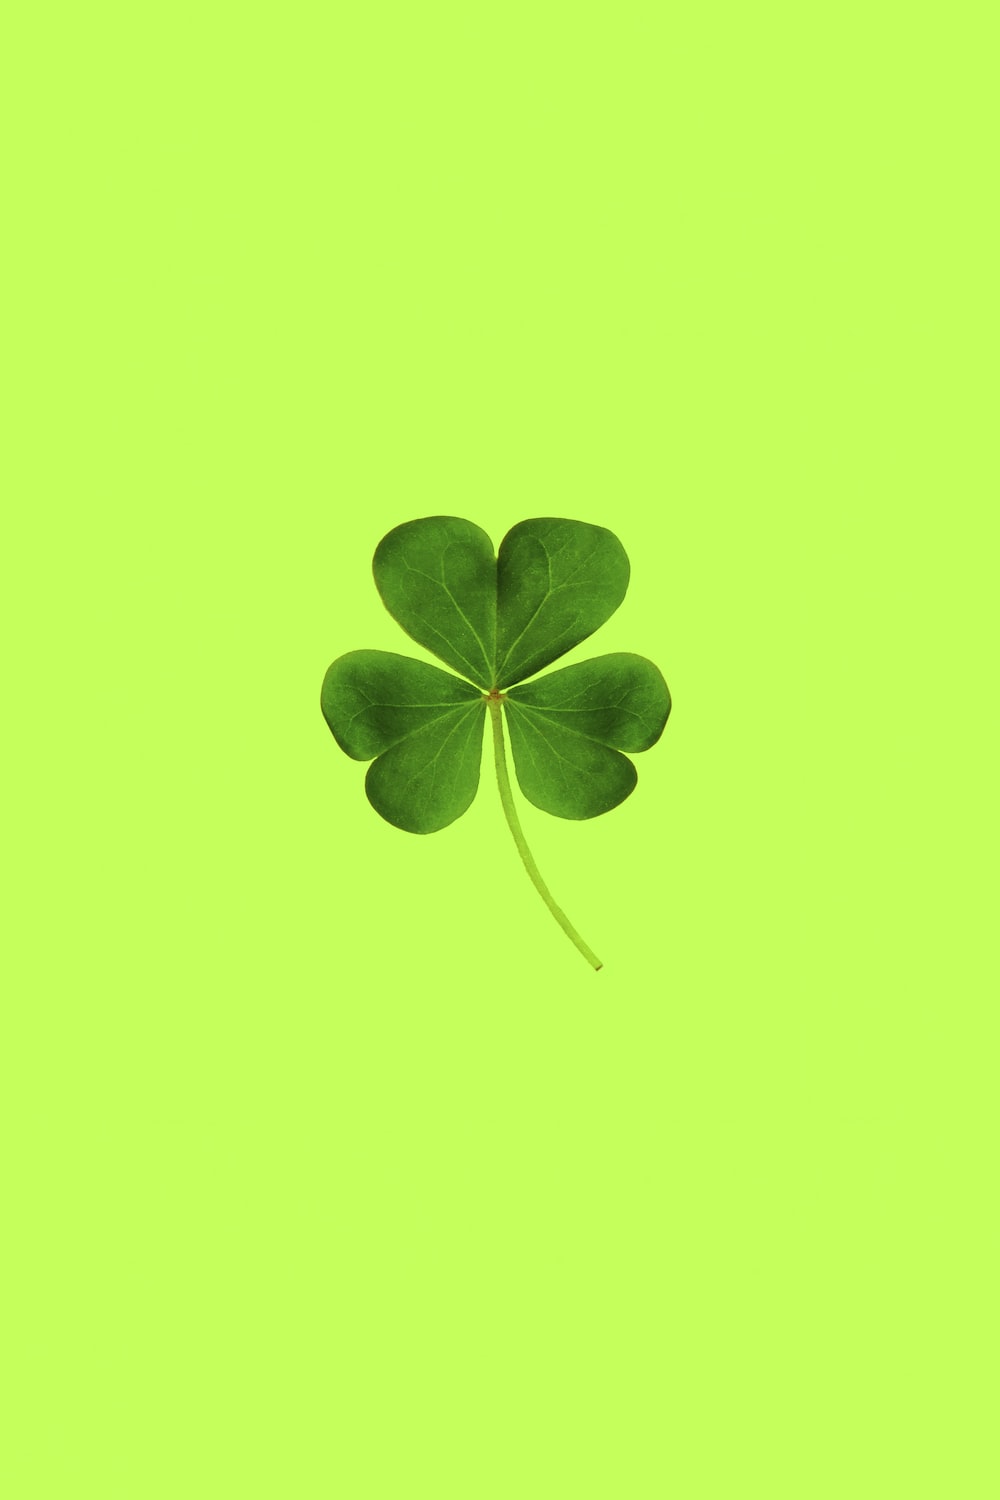 How can I attract luck?